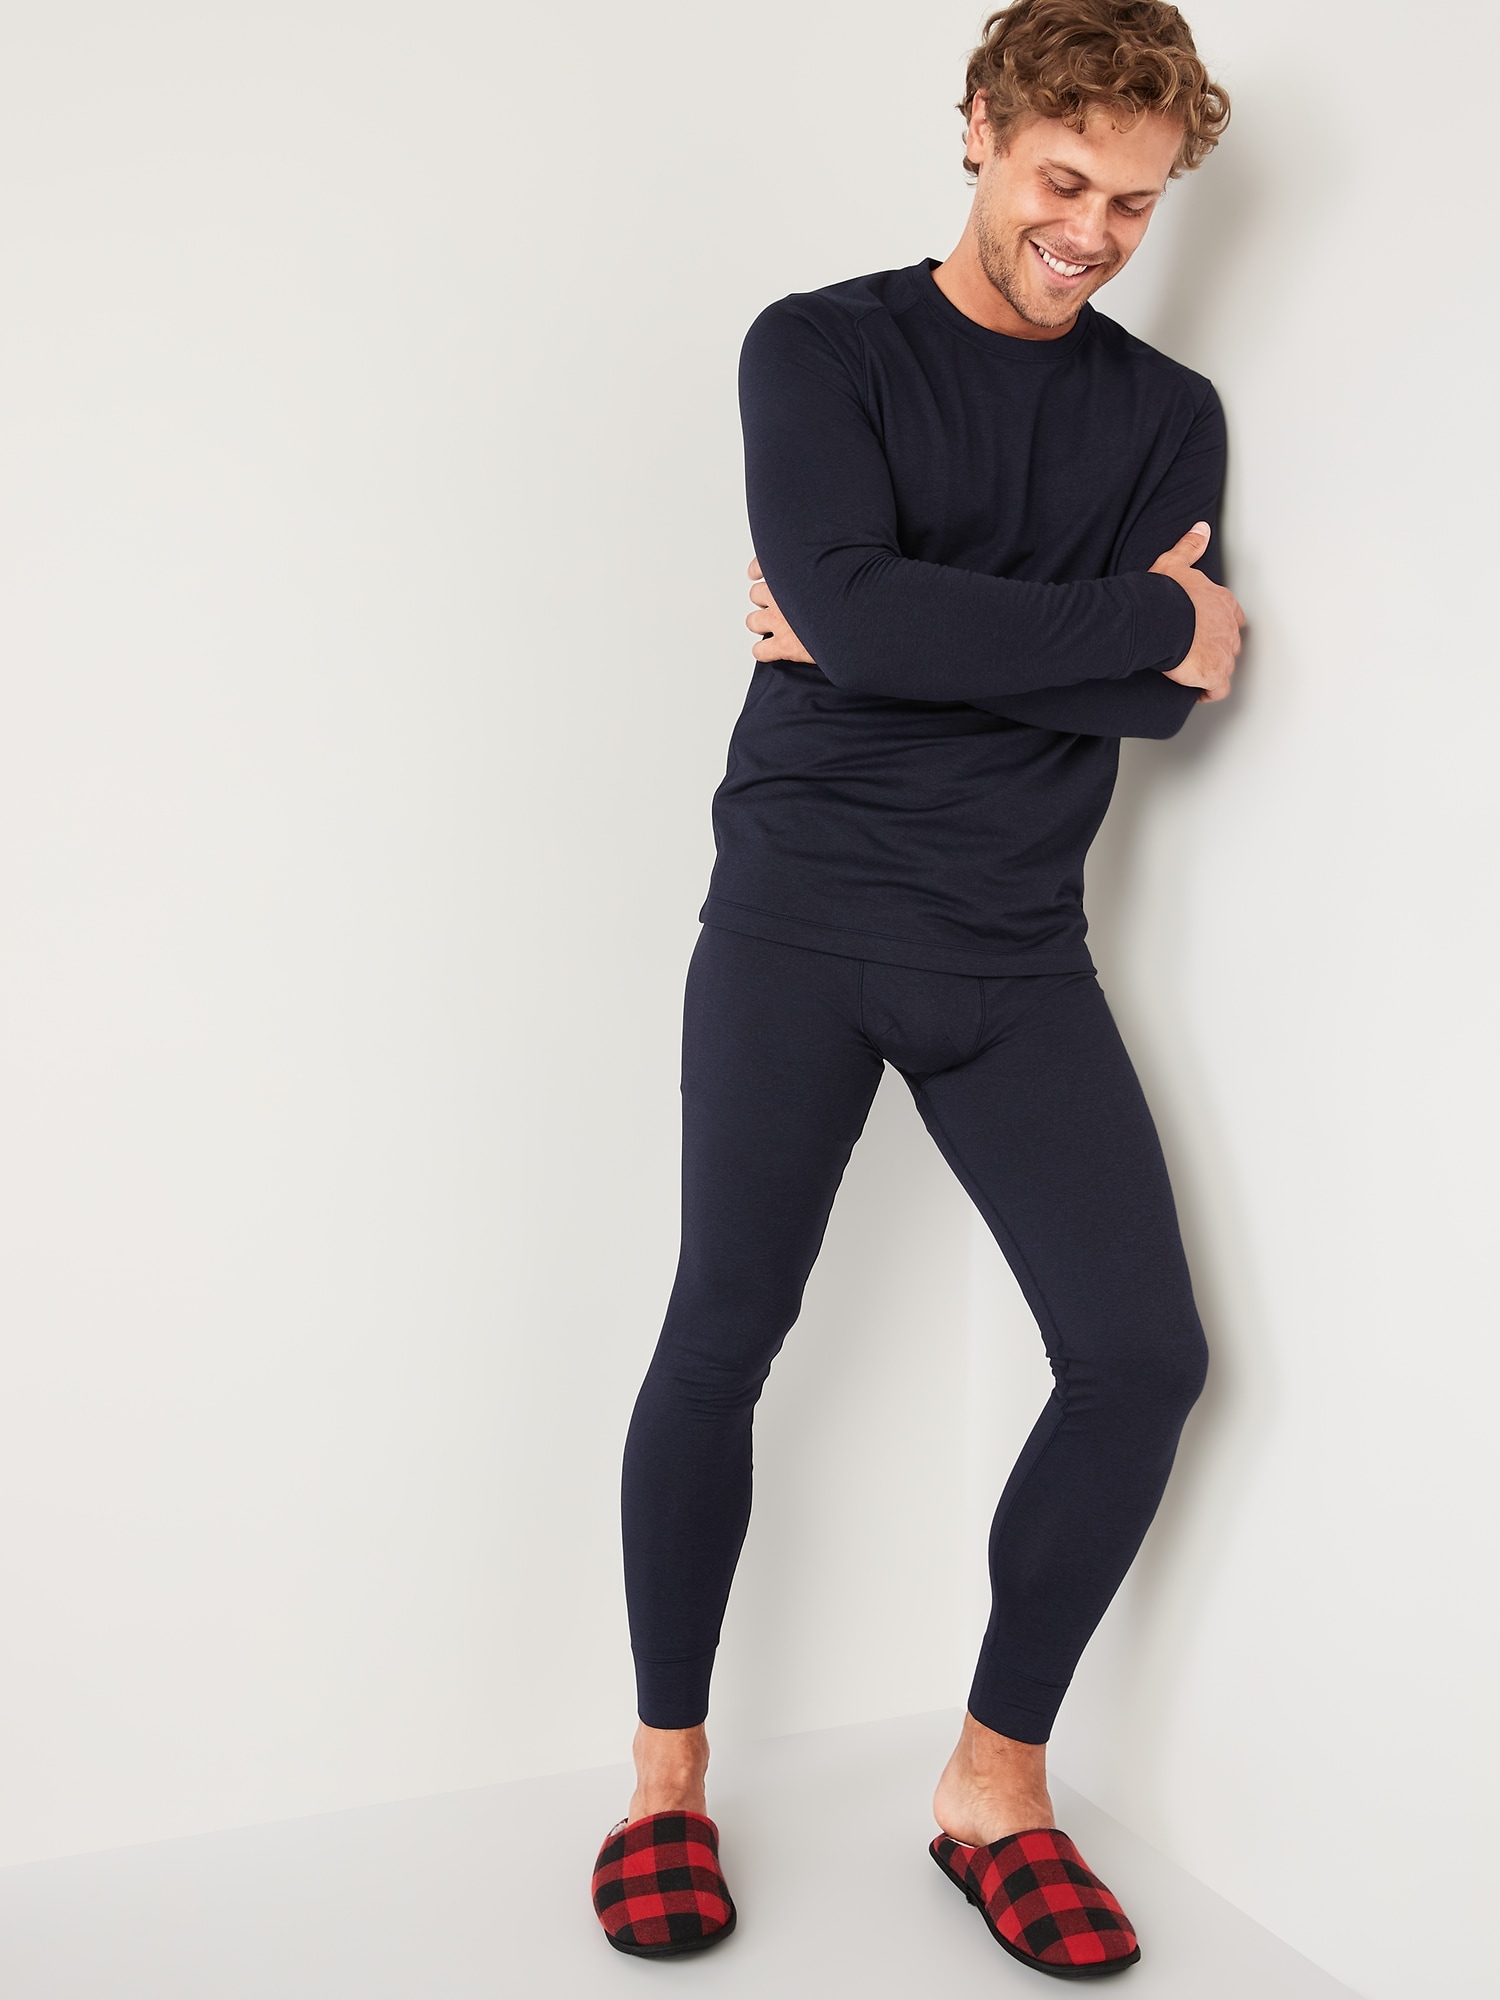 CozeCore Base Layer Long-Sleeve T-Shirt & Base Layer Tights Set for Men